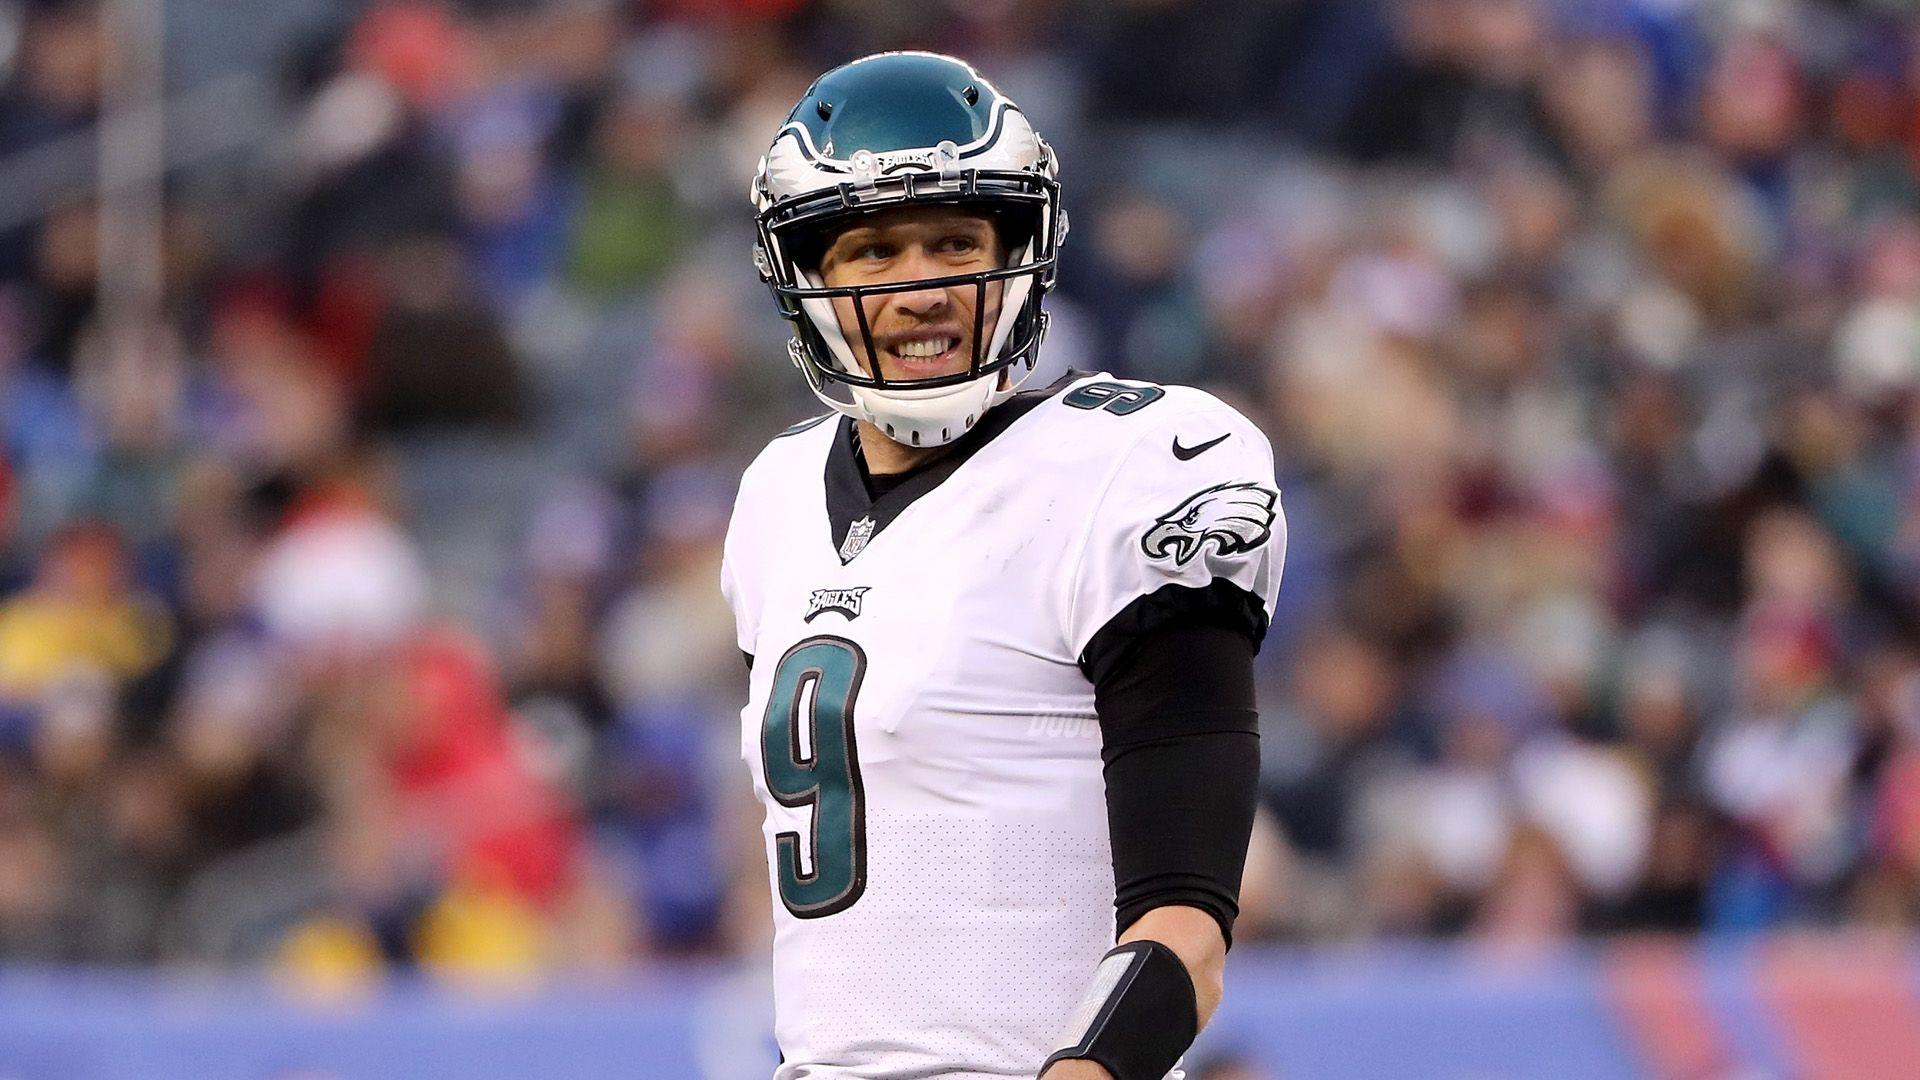 WATCH: Philadelphia Eagles QB Nick Foles throws four TDs in first